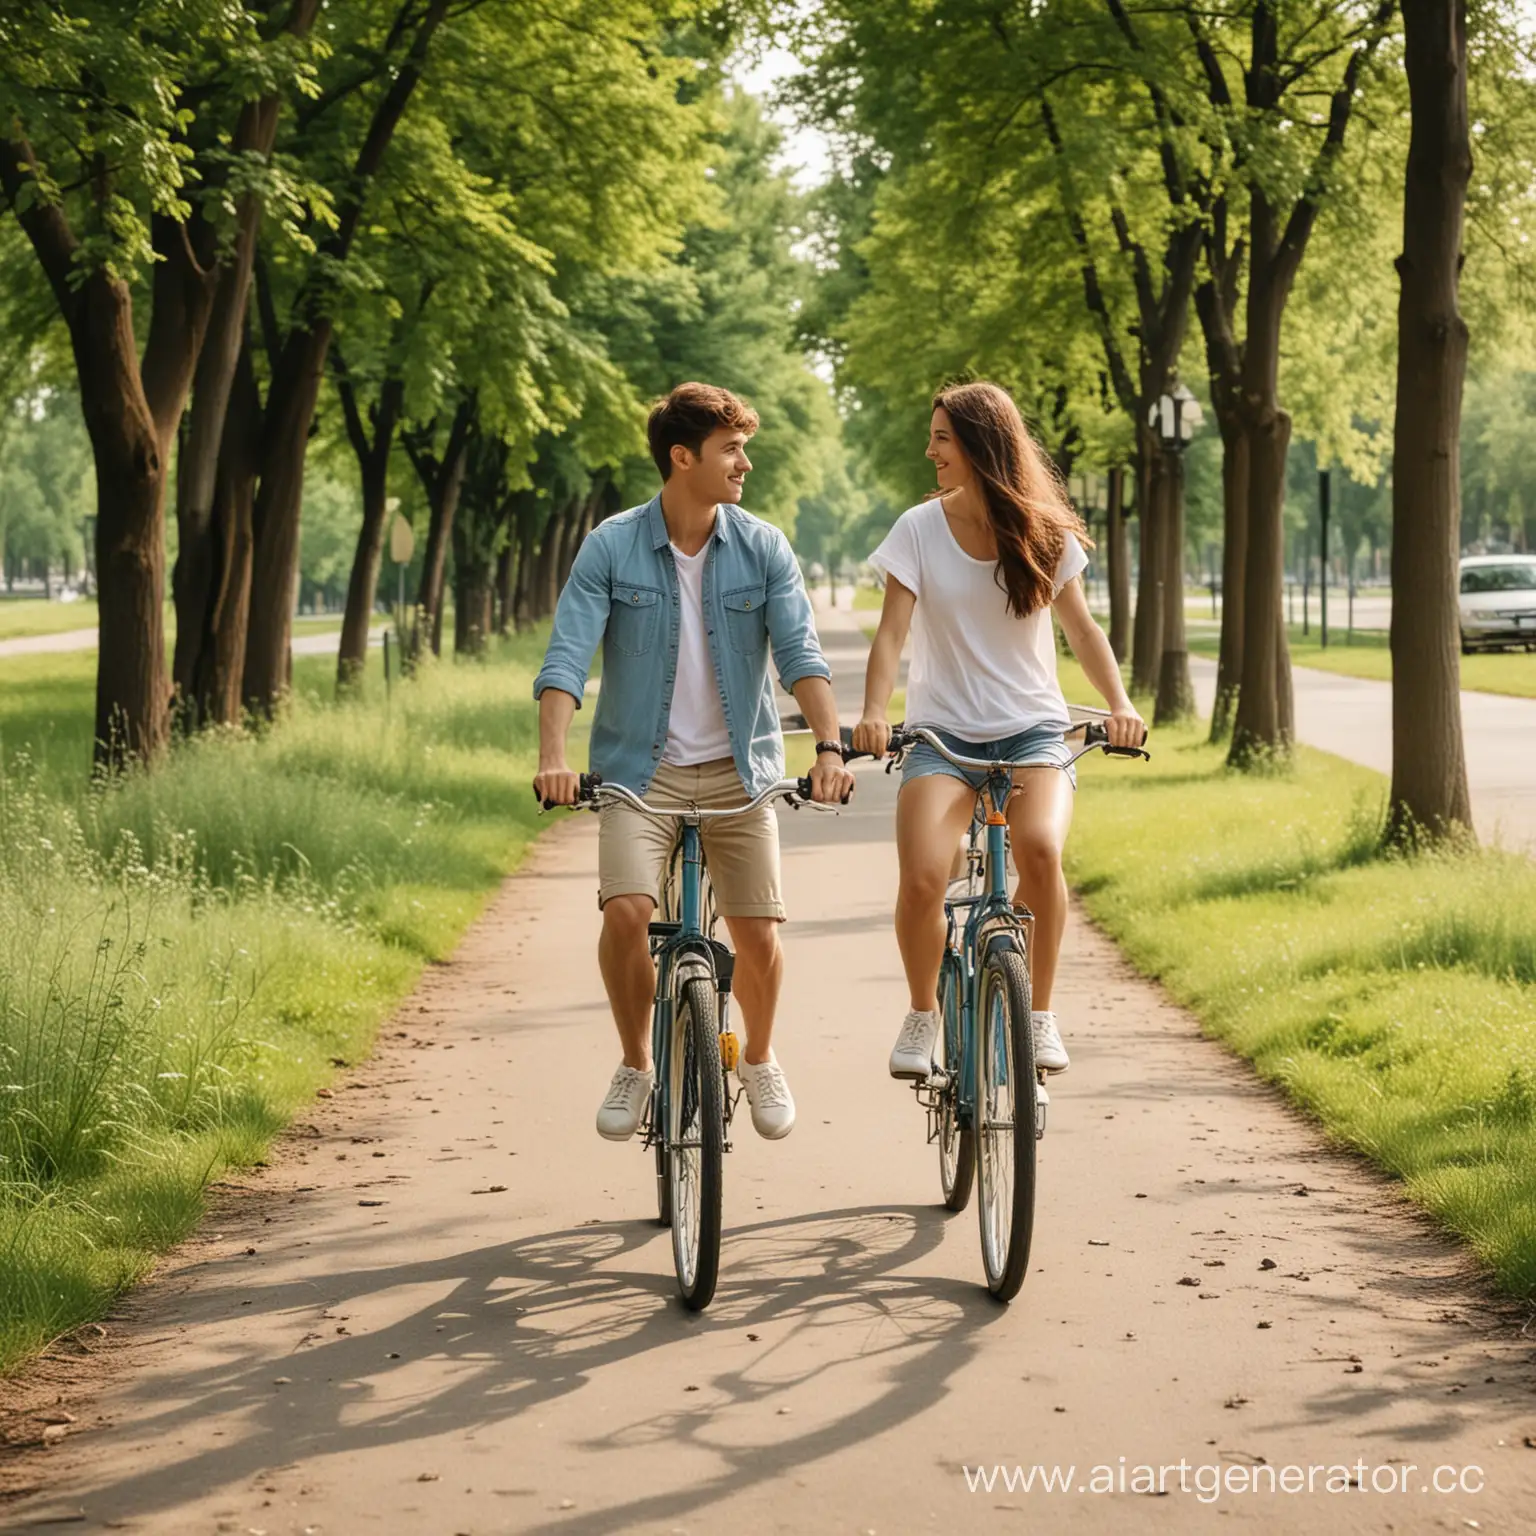 Youthful-Duo-Cycling-Amidst-Lush-Summer-Park-Landscape